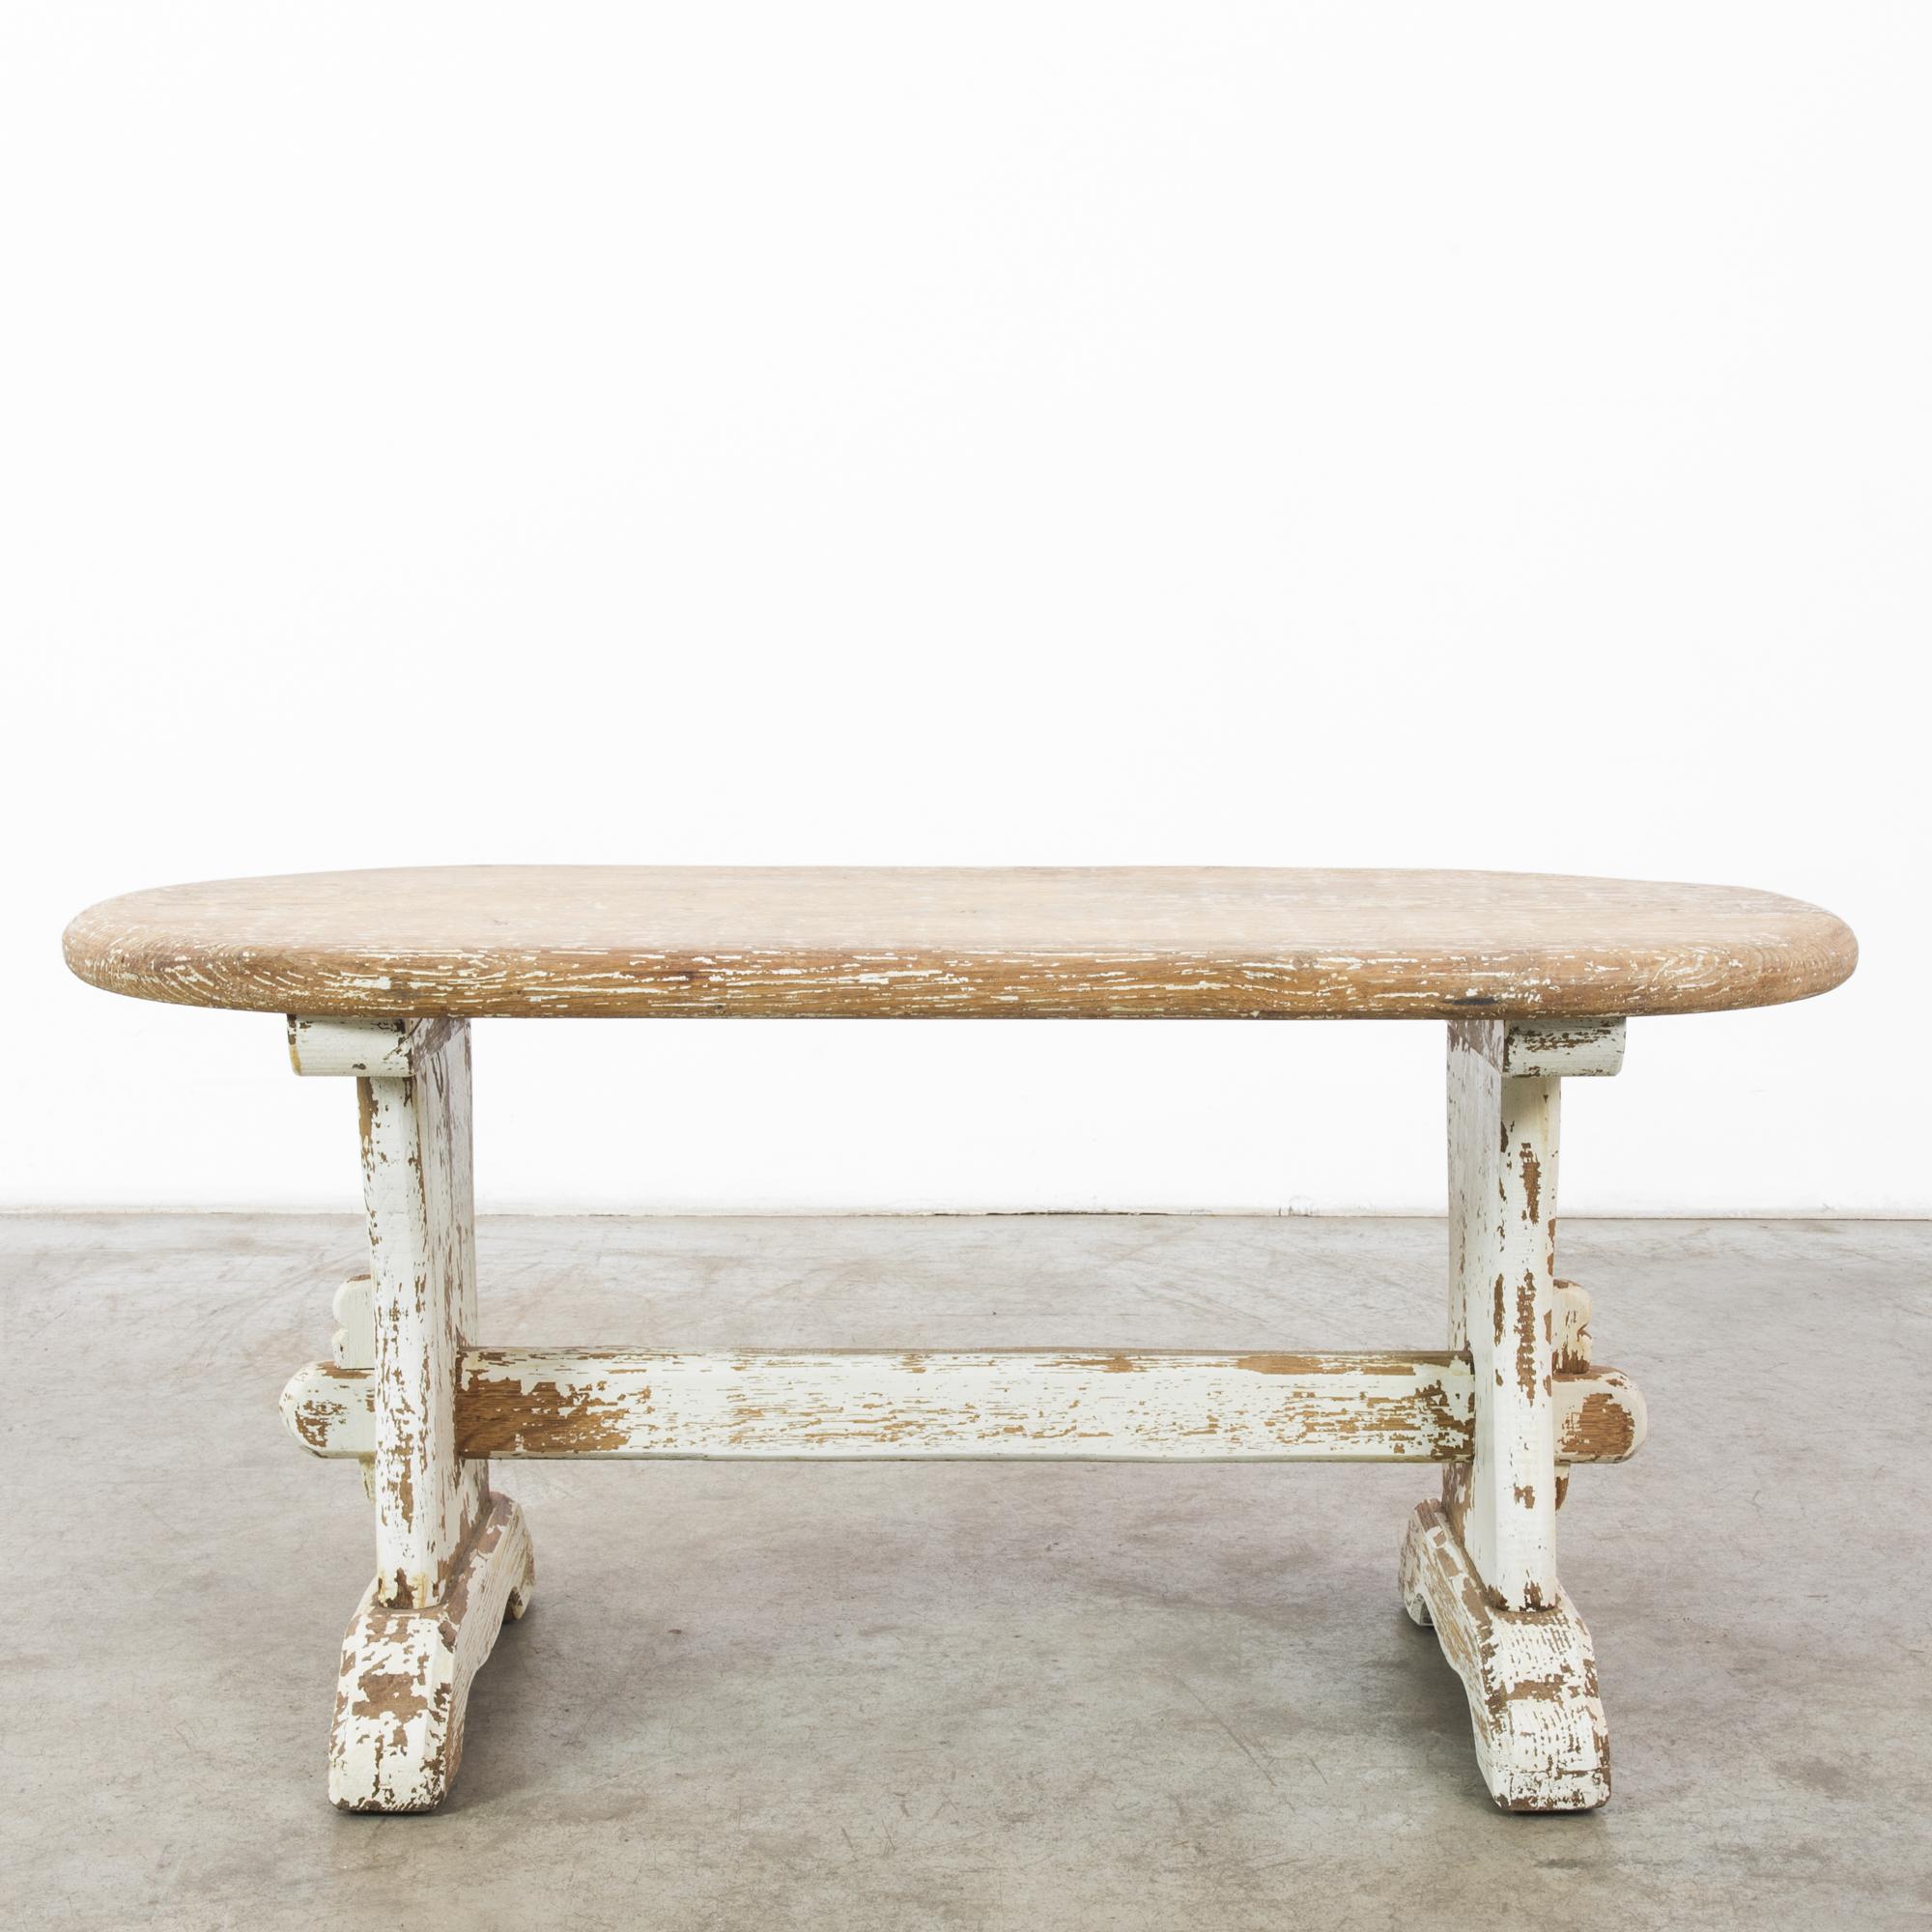 This wooden trestle table was made in France, circa 1950. The solid posts and traditional joinery impart a charming, handcrafted quality and a medieval spirit. It evokes the warmth of a rustic farmhouse with the distressed white frame and earthy